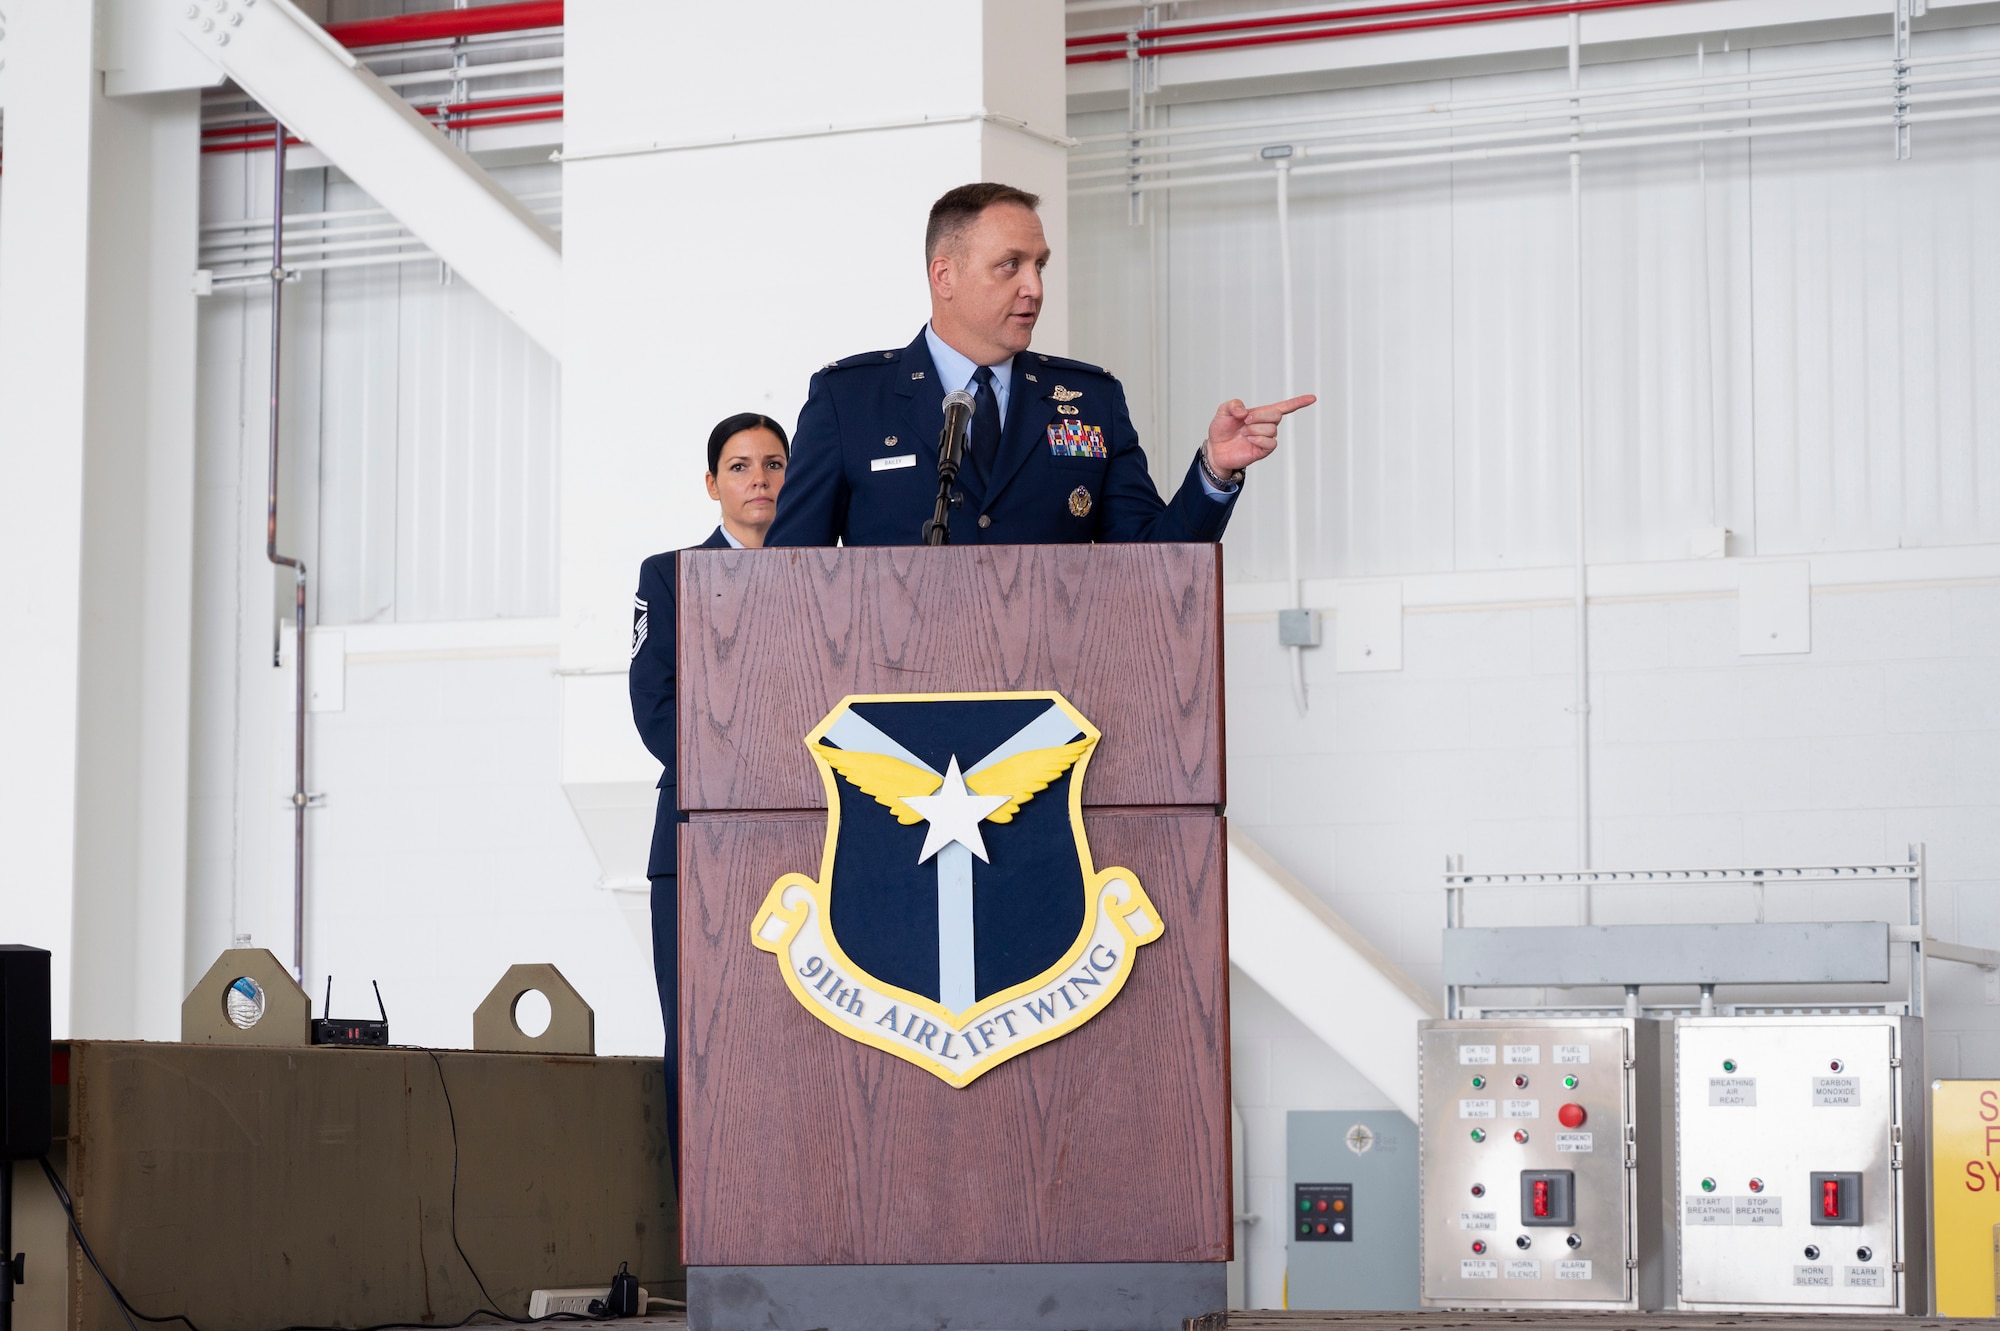 Col. Bryan M. Bailey, 911th Airlift Wing commander, addresses Airmen and guests during his assumption of command ceremony at the Pittsburgh International Airport Air Reserve Station, Pennsylvania, Aug. 7, 2022.